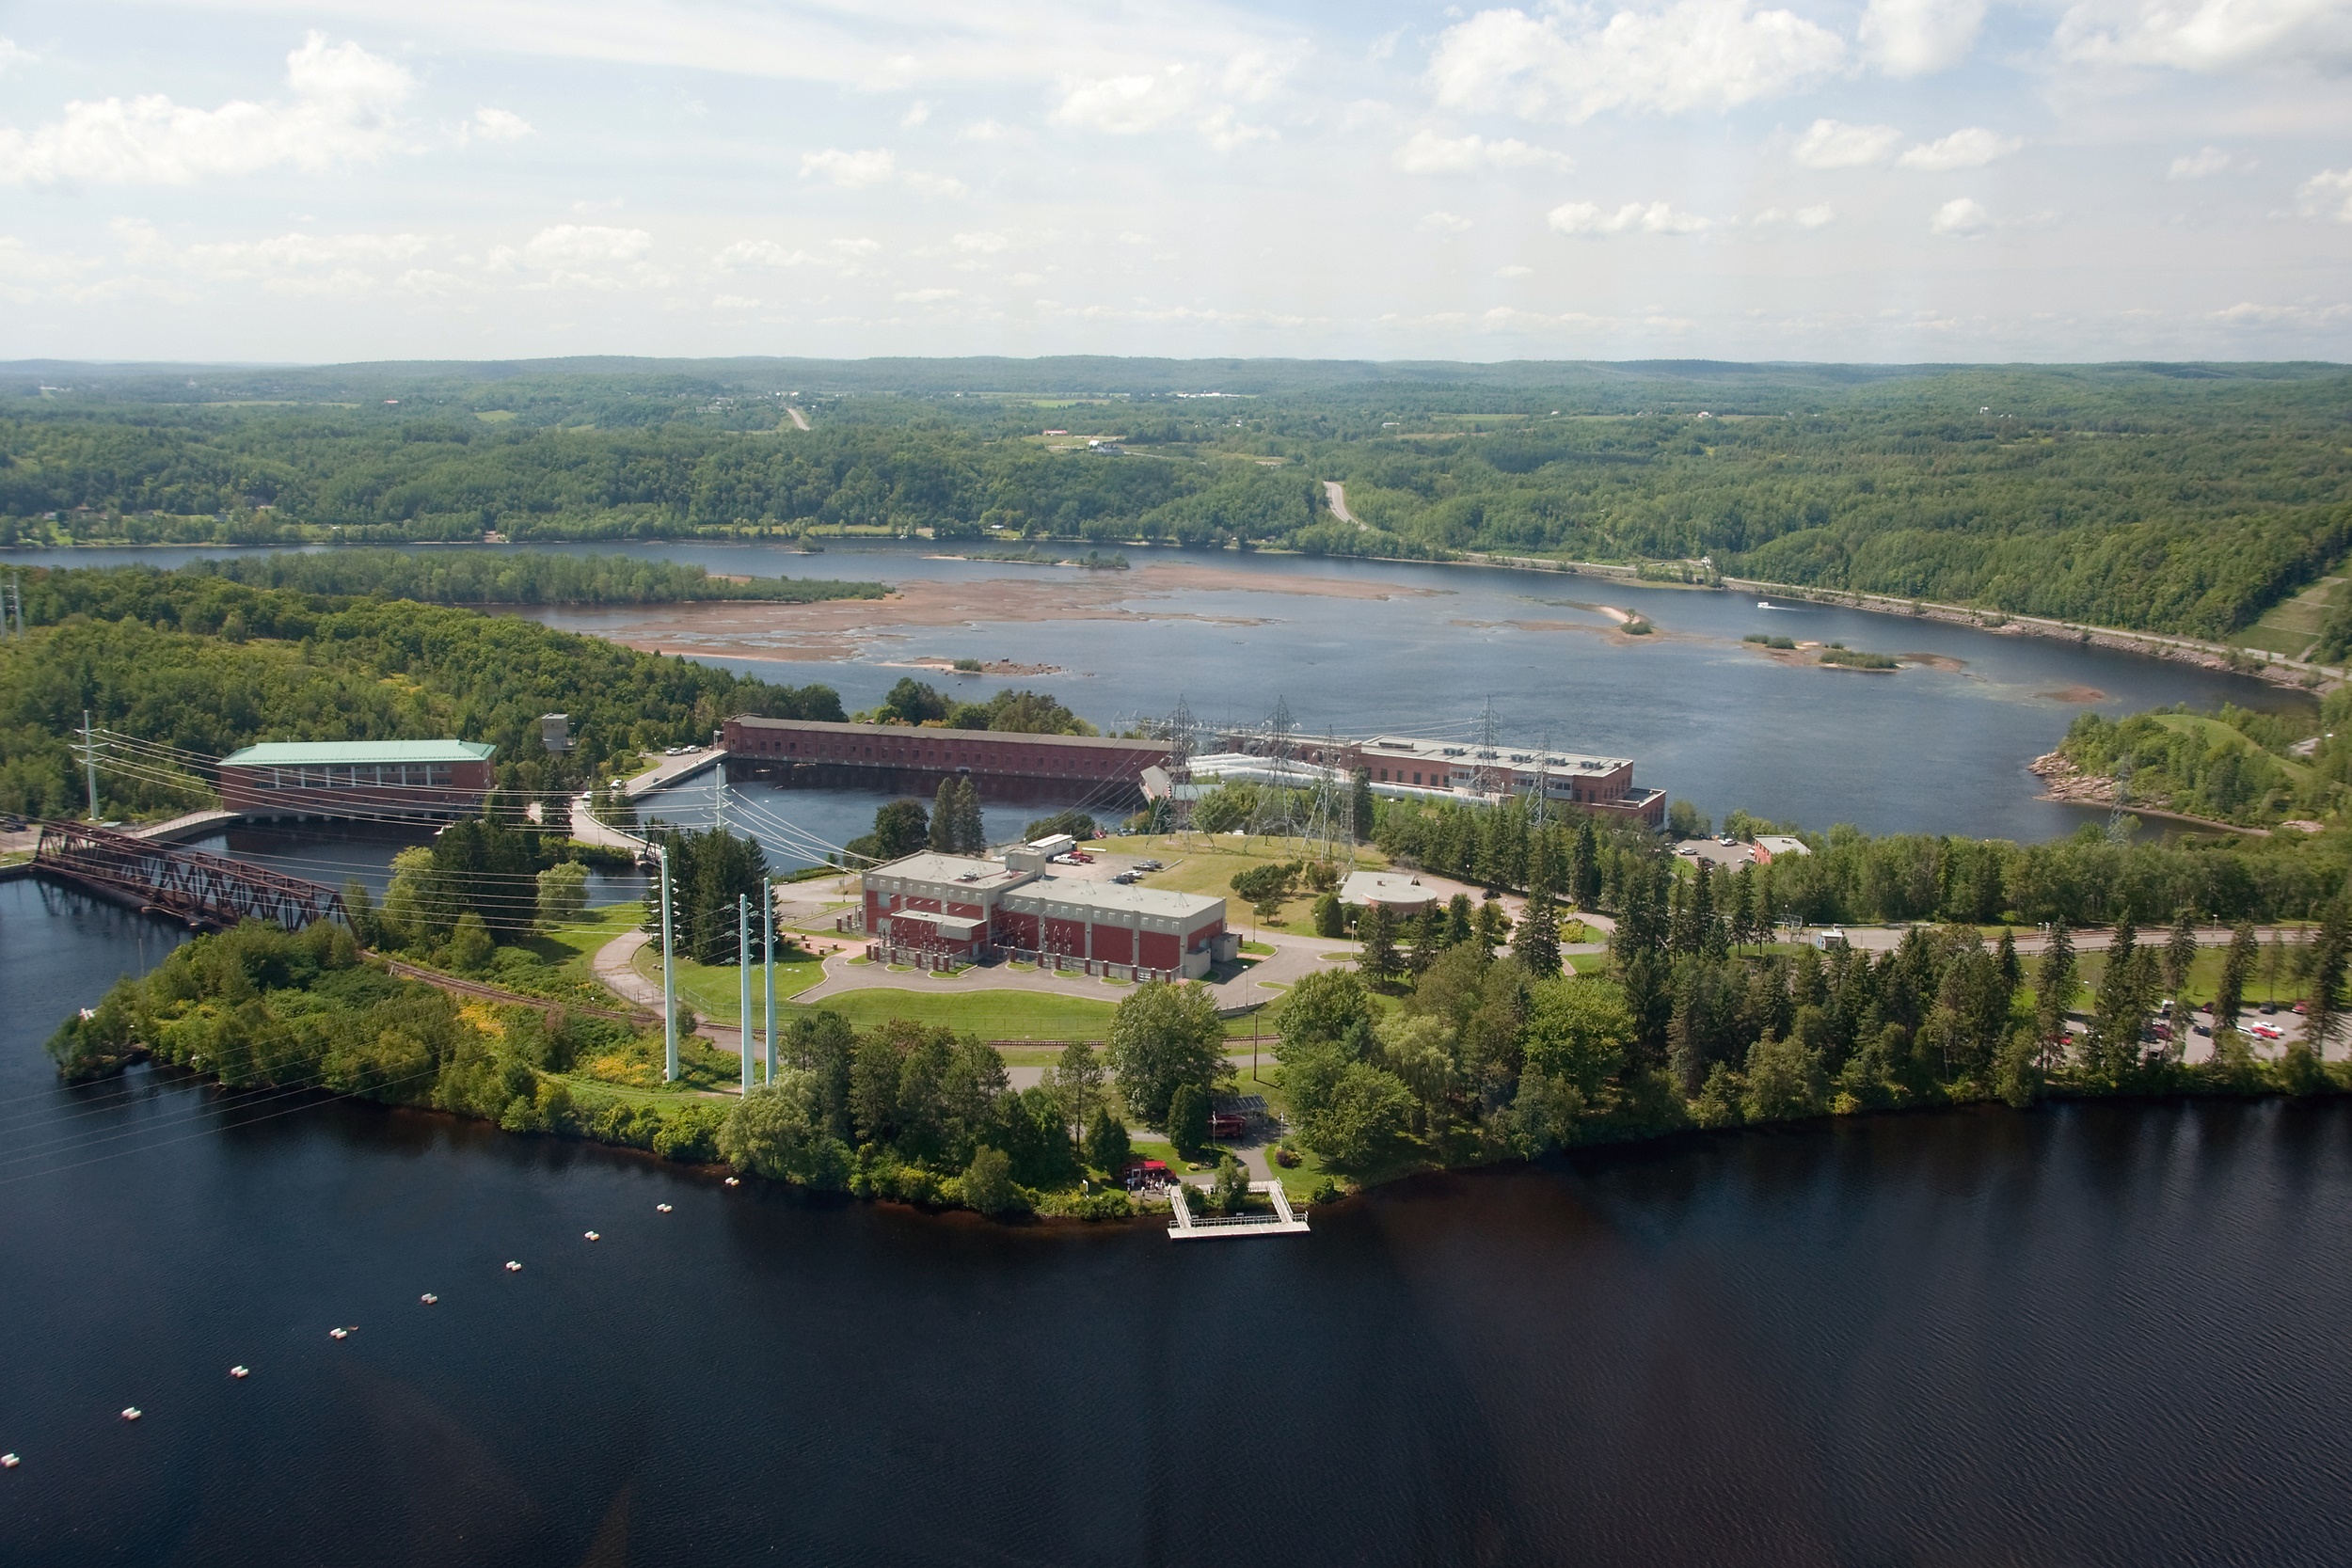 Shawinigan hydropower complex, in Quebec, has generated electricity for more than 100 years. The North American Clean Energy Plan, announced on June 29, 2016, could boost Canadian hydropower production. Photo © Shutterstock